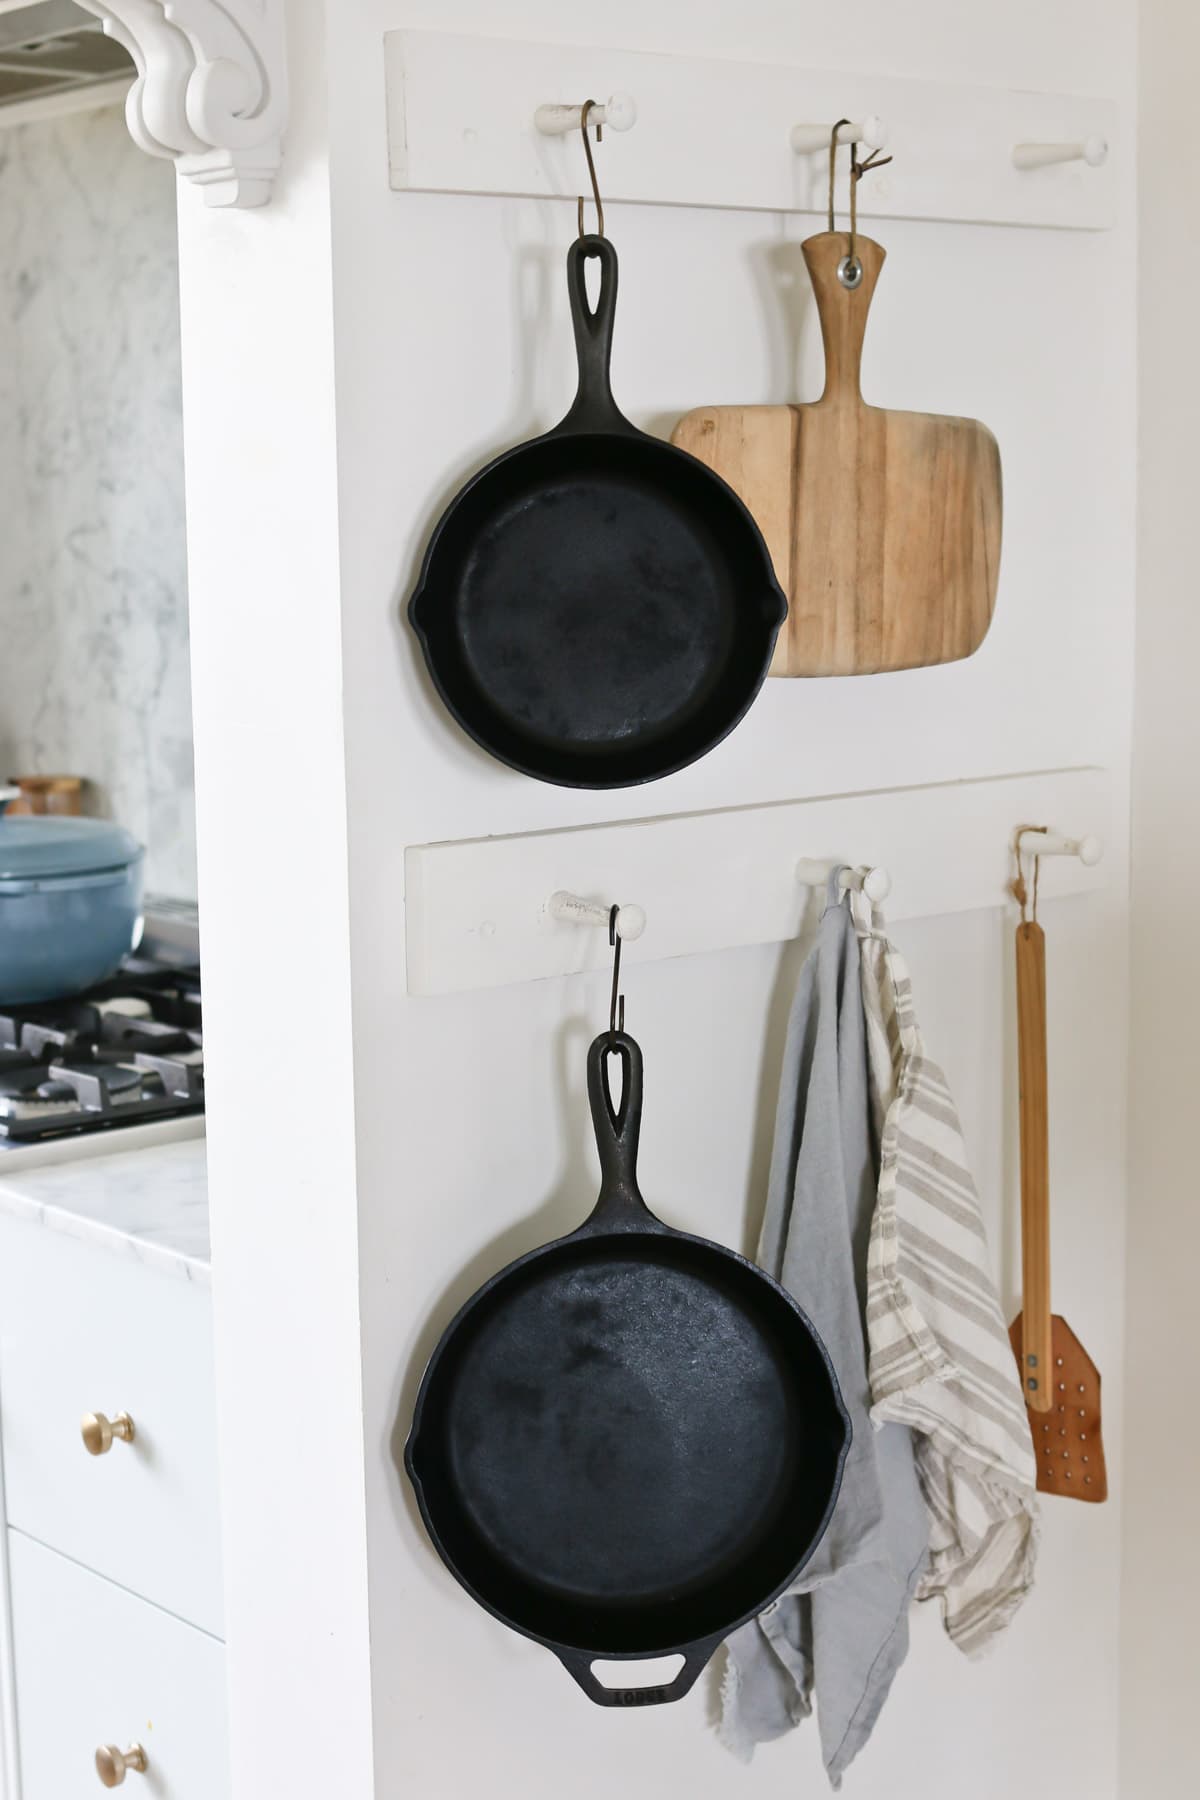 how to clean and care for a cast iron skillet